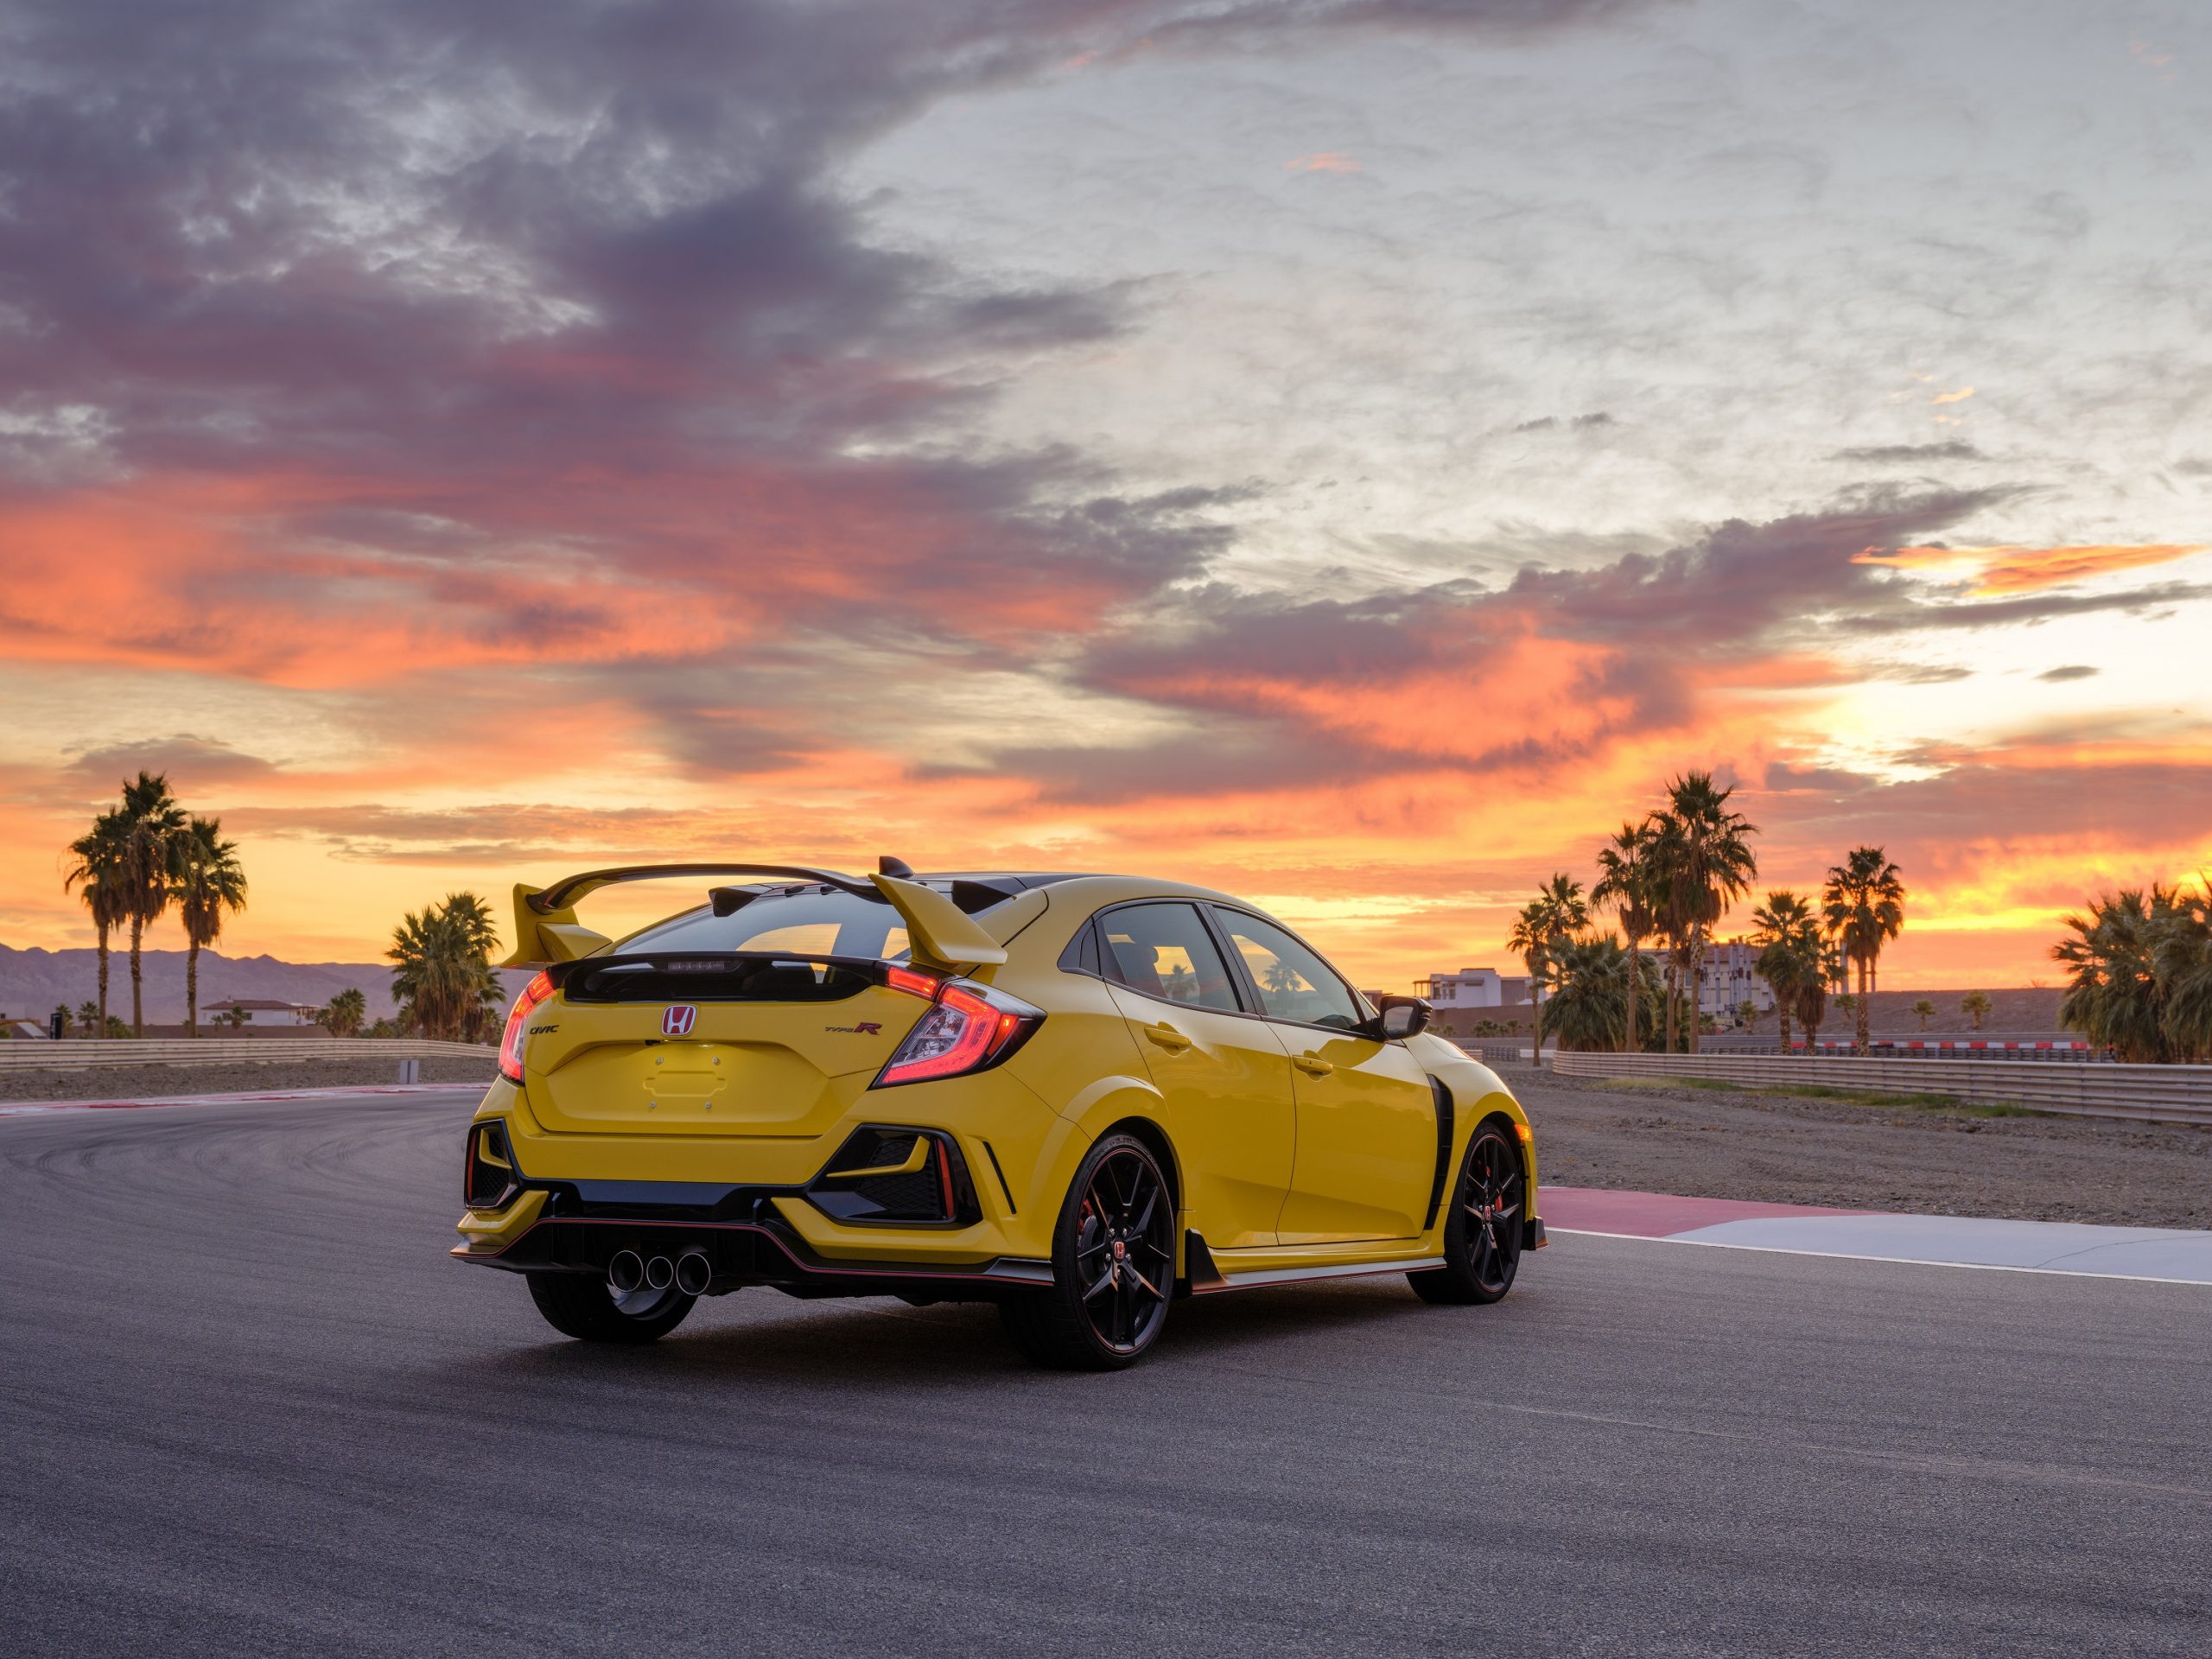 The rear of a Phoenix Yellow Honda Civic Type R, shot at sunset on a race track